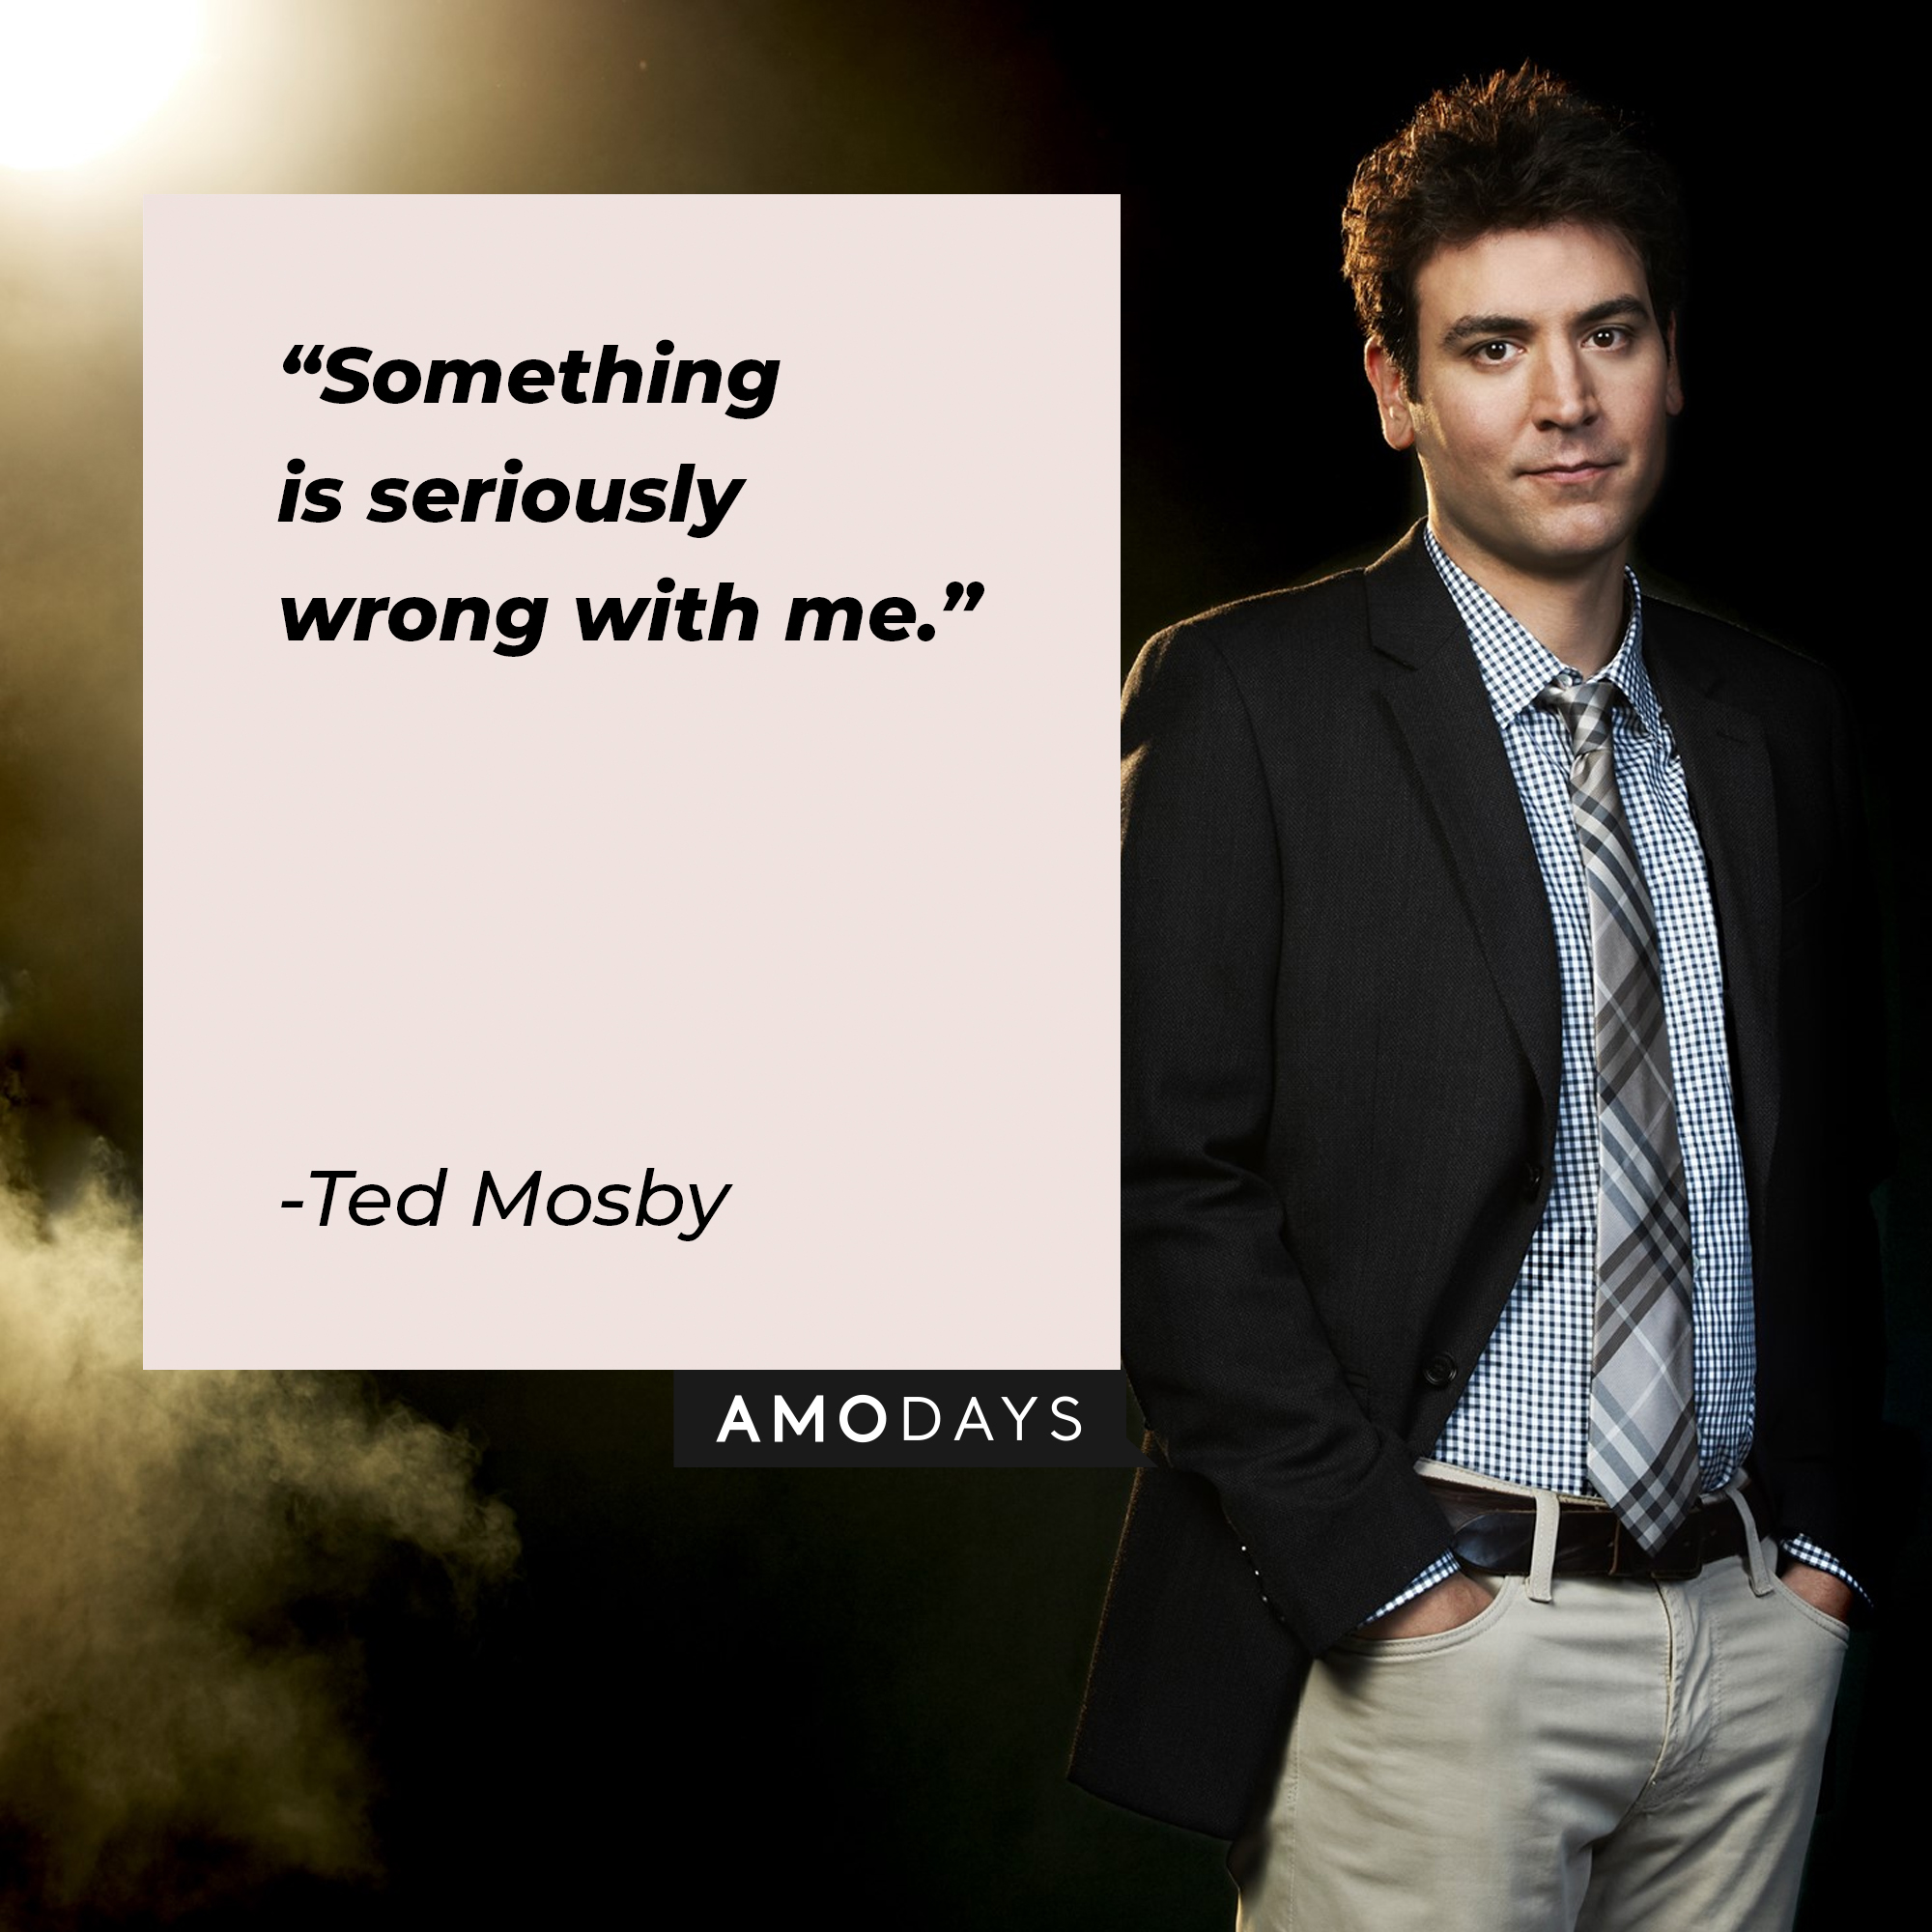 A picture of Ted Mosby with his quote, “"Something is seriously wrong with me.” | Source: facebook.com/OfficialHowIMetYourMother